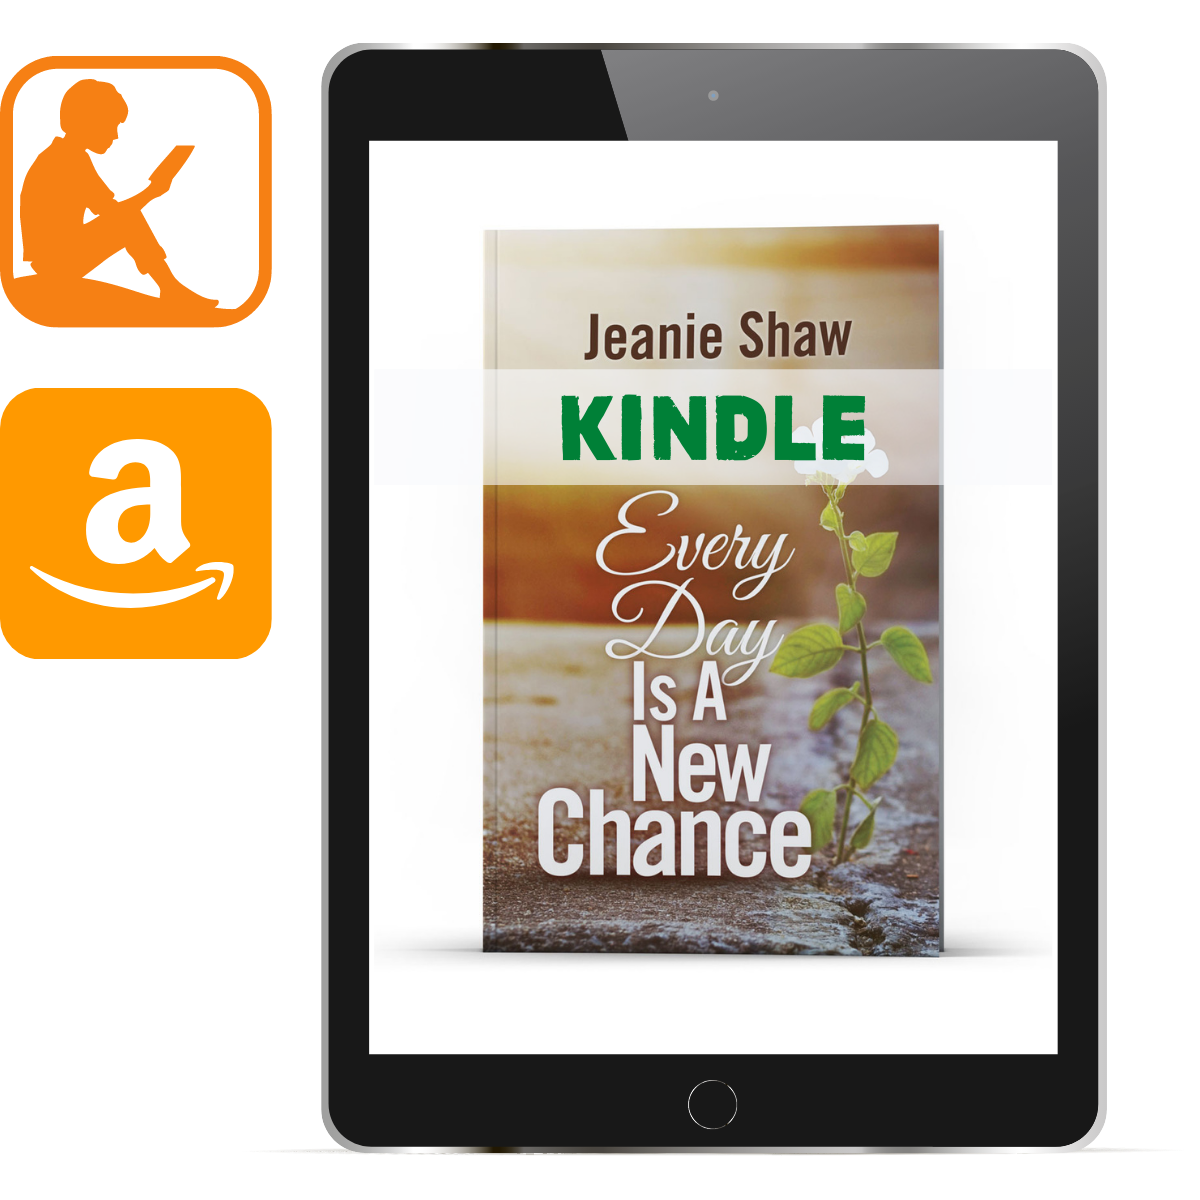 Every Day Is a New Chance (Kindle) - Illumination Publishers